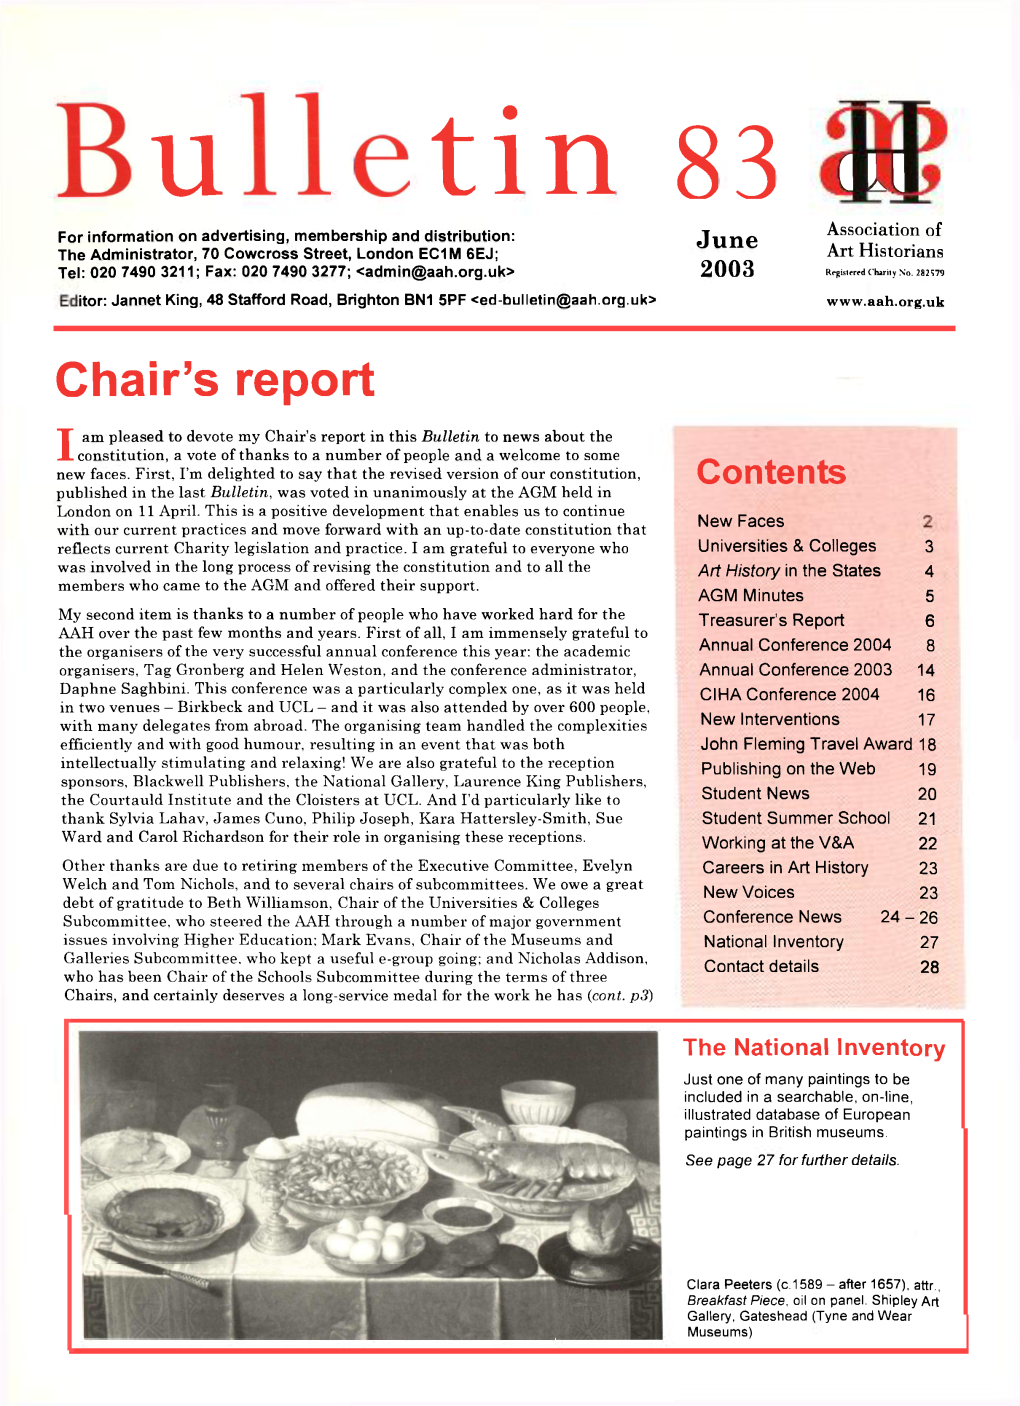 Contents Published in the Last Bulletin, Was Voted in Unanimously at the AGM Held in London on 11 April